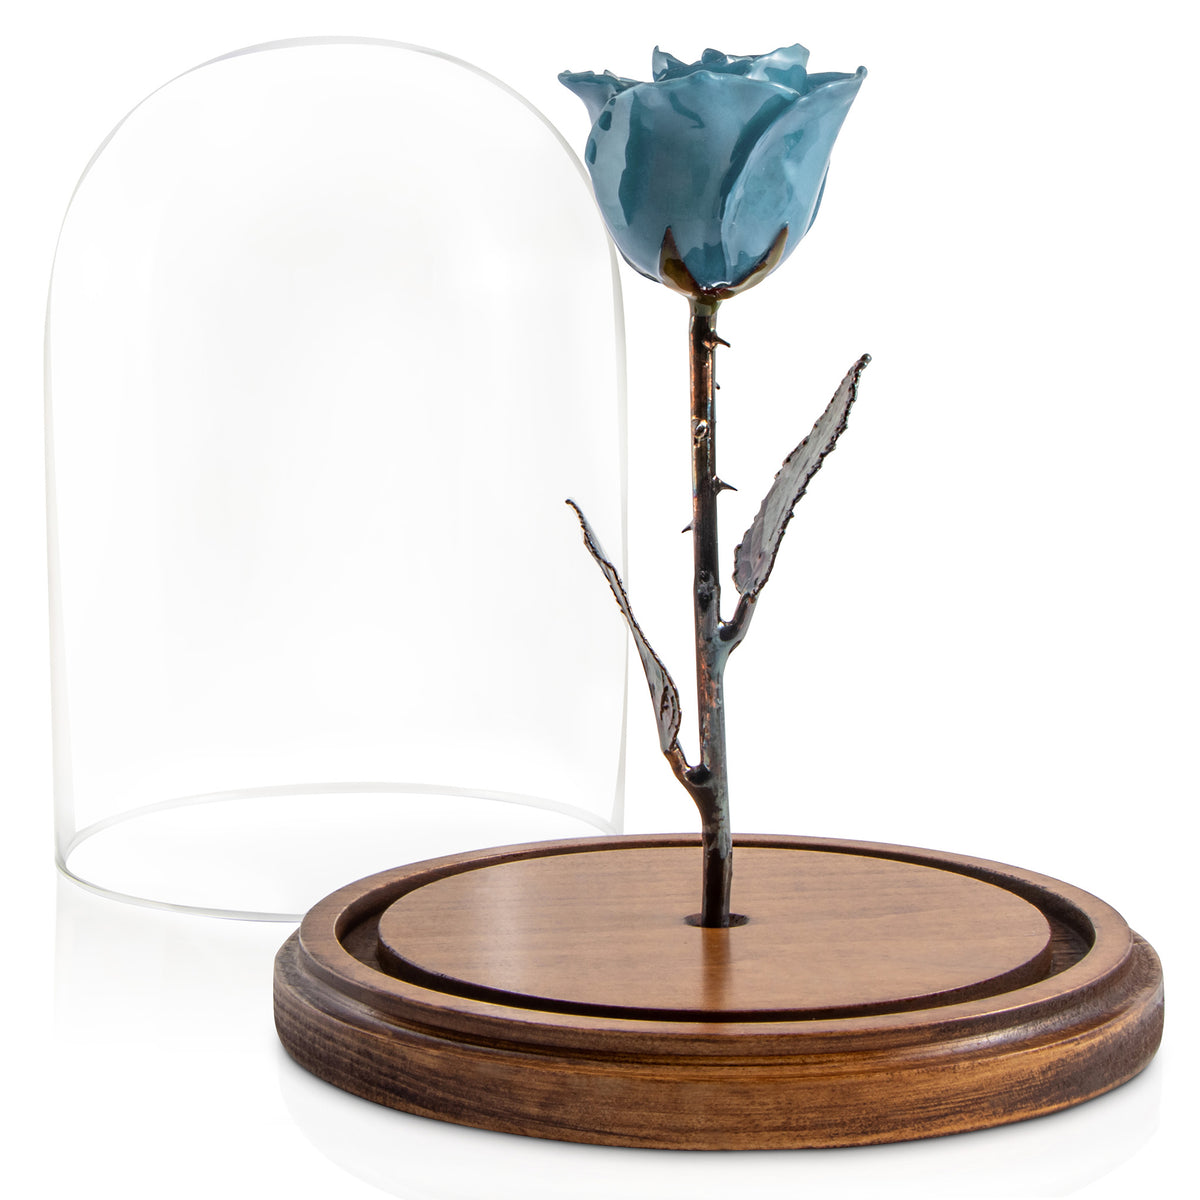 Blue Enchanted Rose (aka Beauty &amp; The Beast Rose) with Patina Copper Stem Mounted to A Hand Turned Solid Wood Base under a glass dome. Shown with dome off.